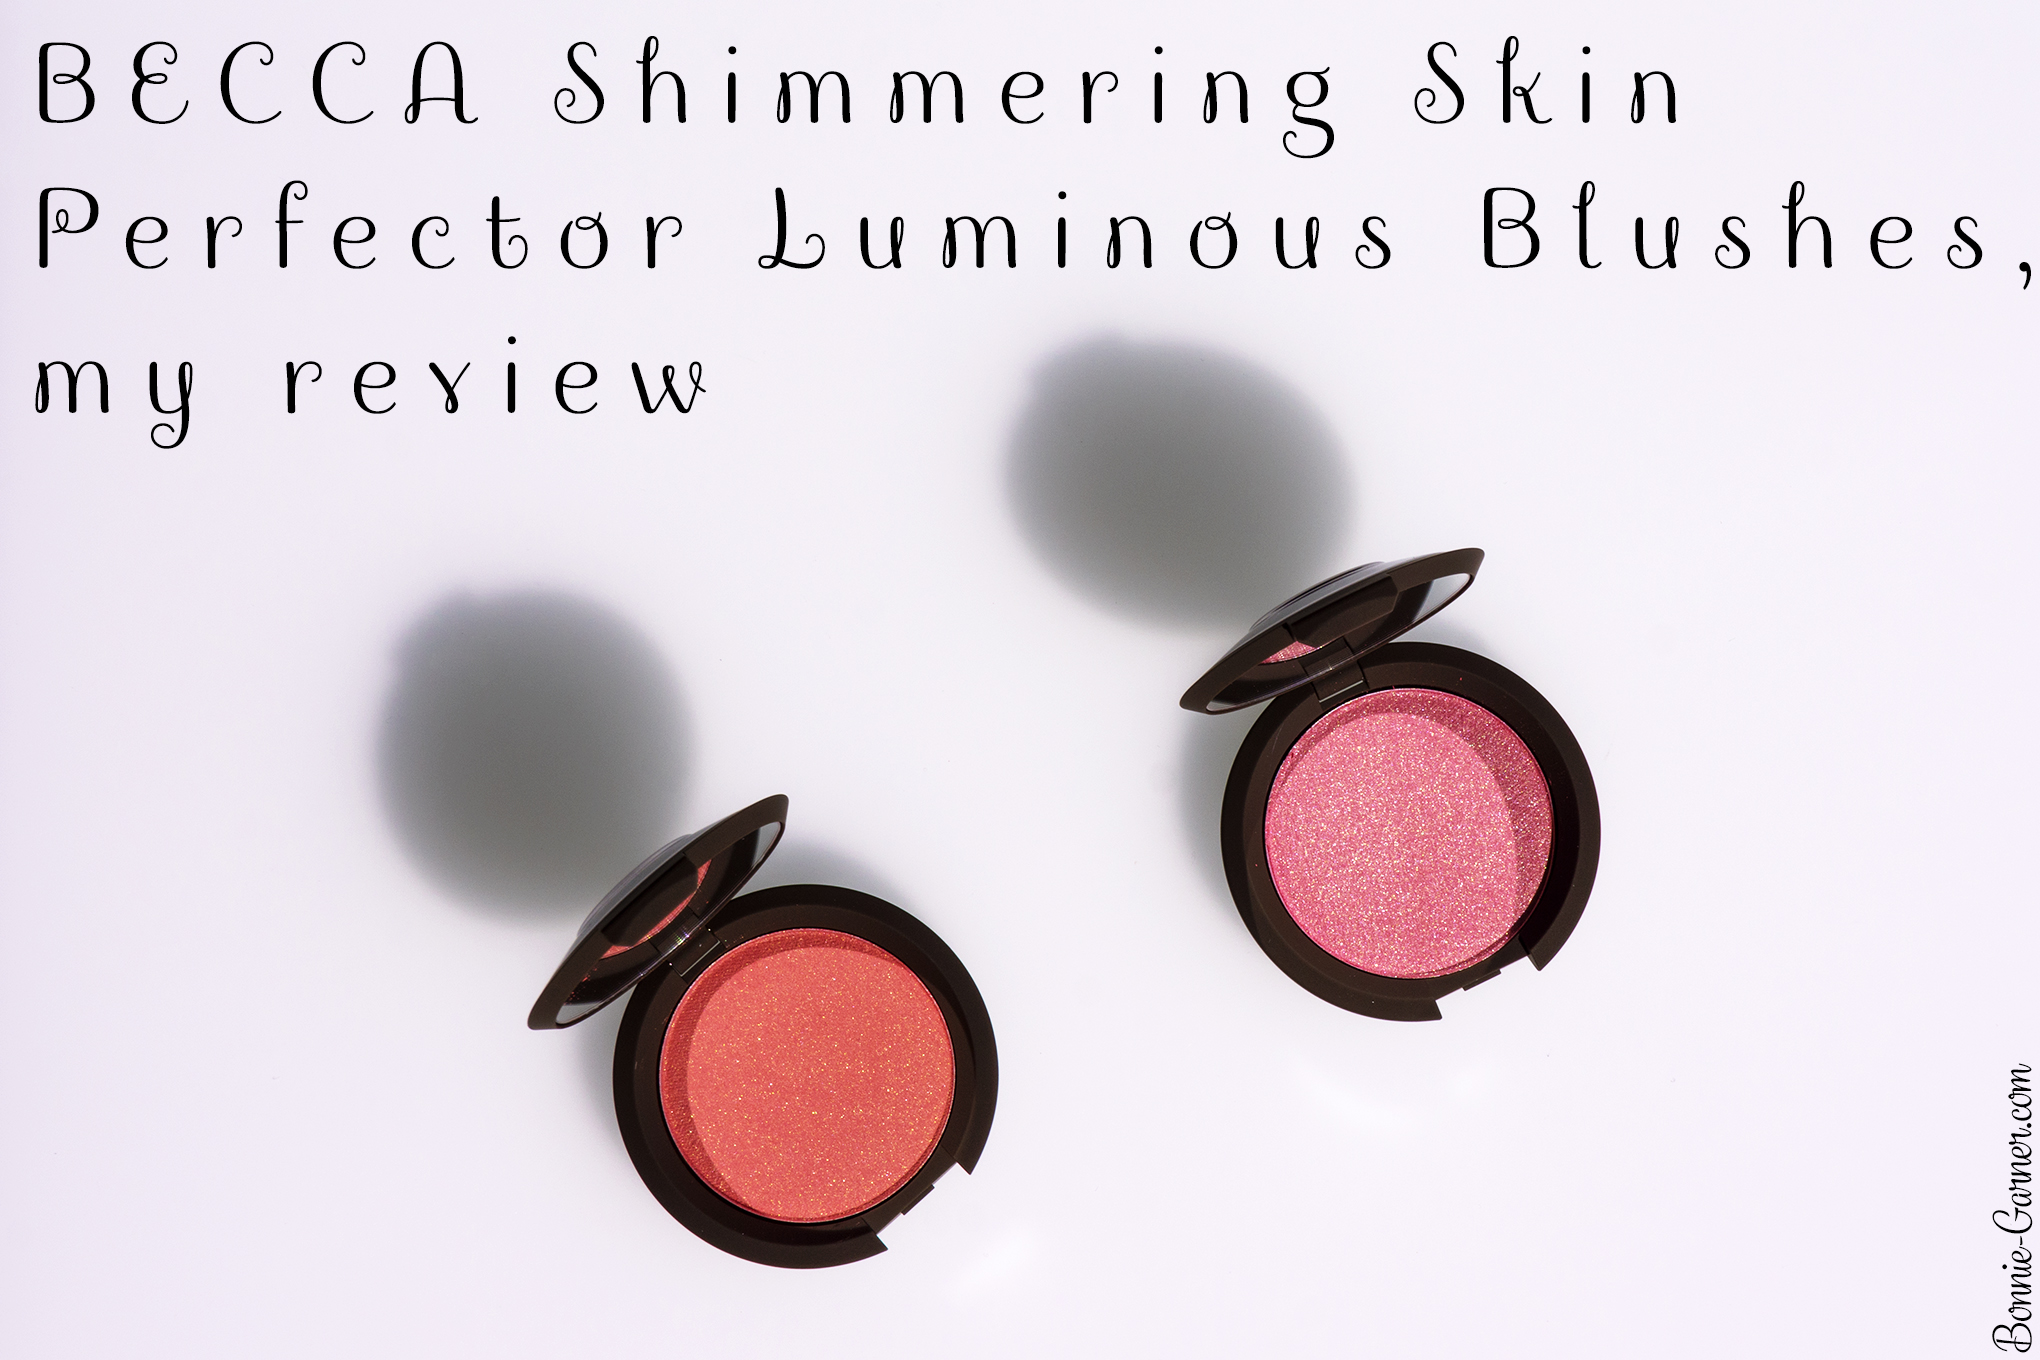 BECCA Shimmering Skin Perfector Luminous Blushes, my review